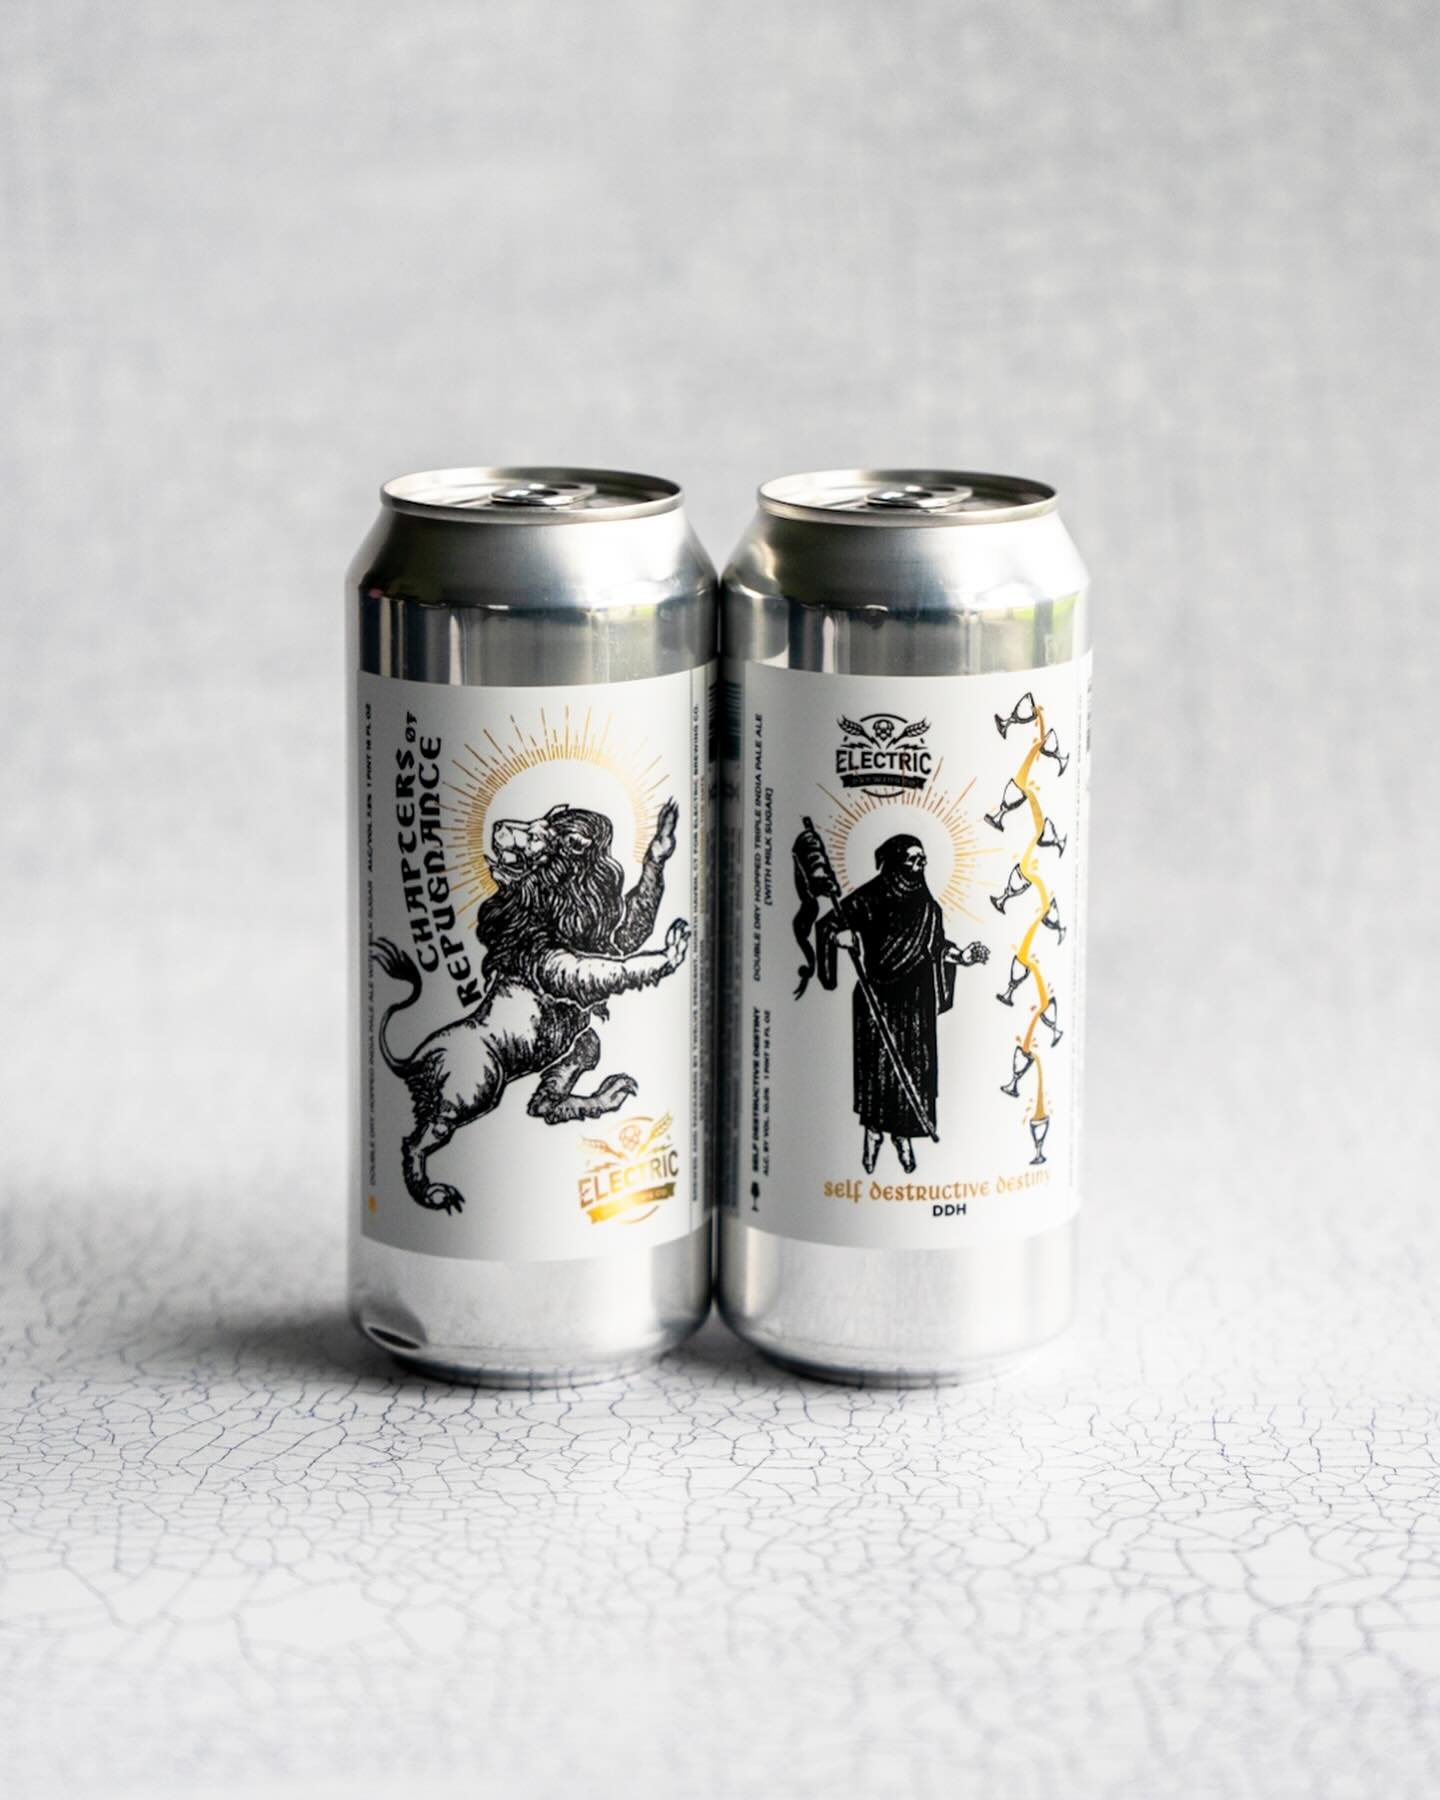 some serious sips from @electricbrewingco ⚡️🍺

👑 Chapters of Repugnance &mdash; DDH IPA &mdash; brewed w/ milk sugar, Citra, &amp; Vic Secret 👉 Untappd Score: 4.35

🧨 Self Destructive Destiny &mdash; Imperial IPA &mdash; brewed w/ oats, raw wheat